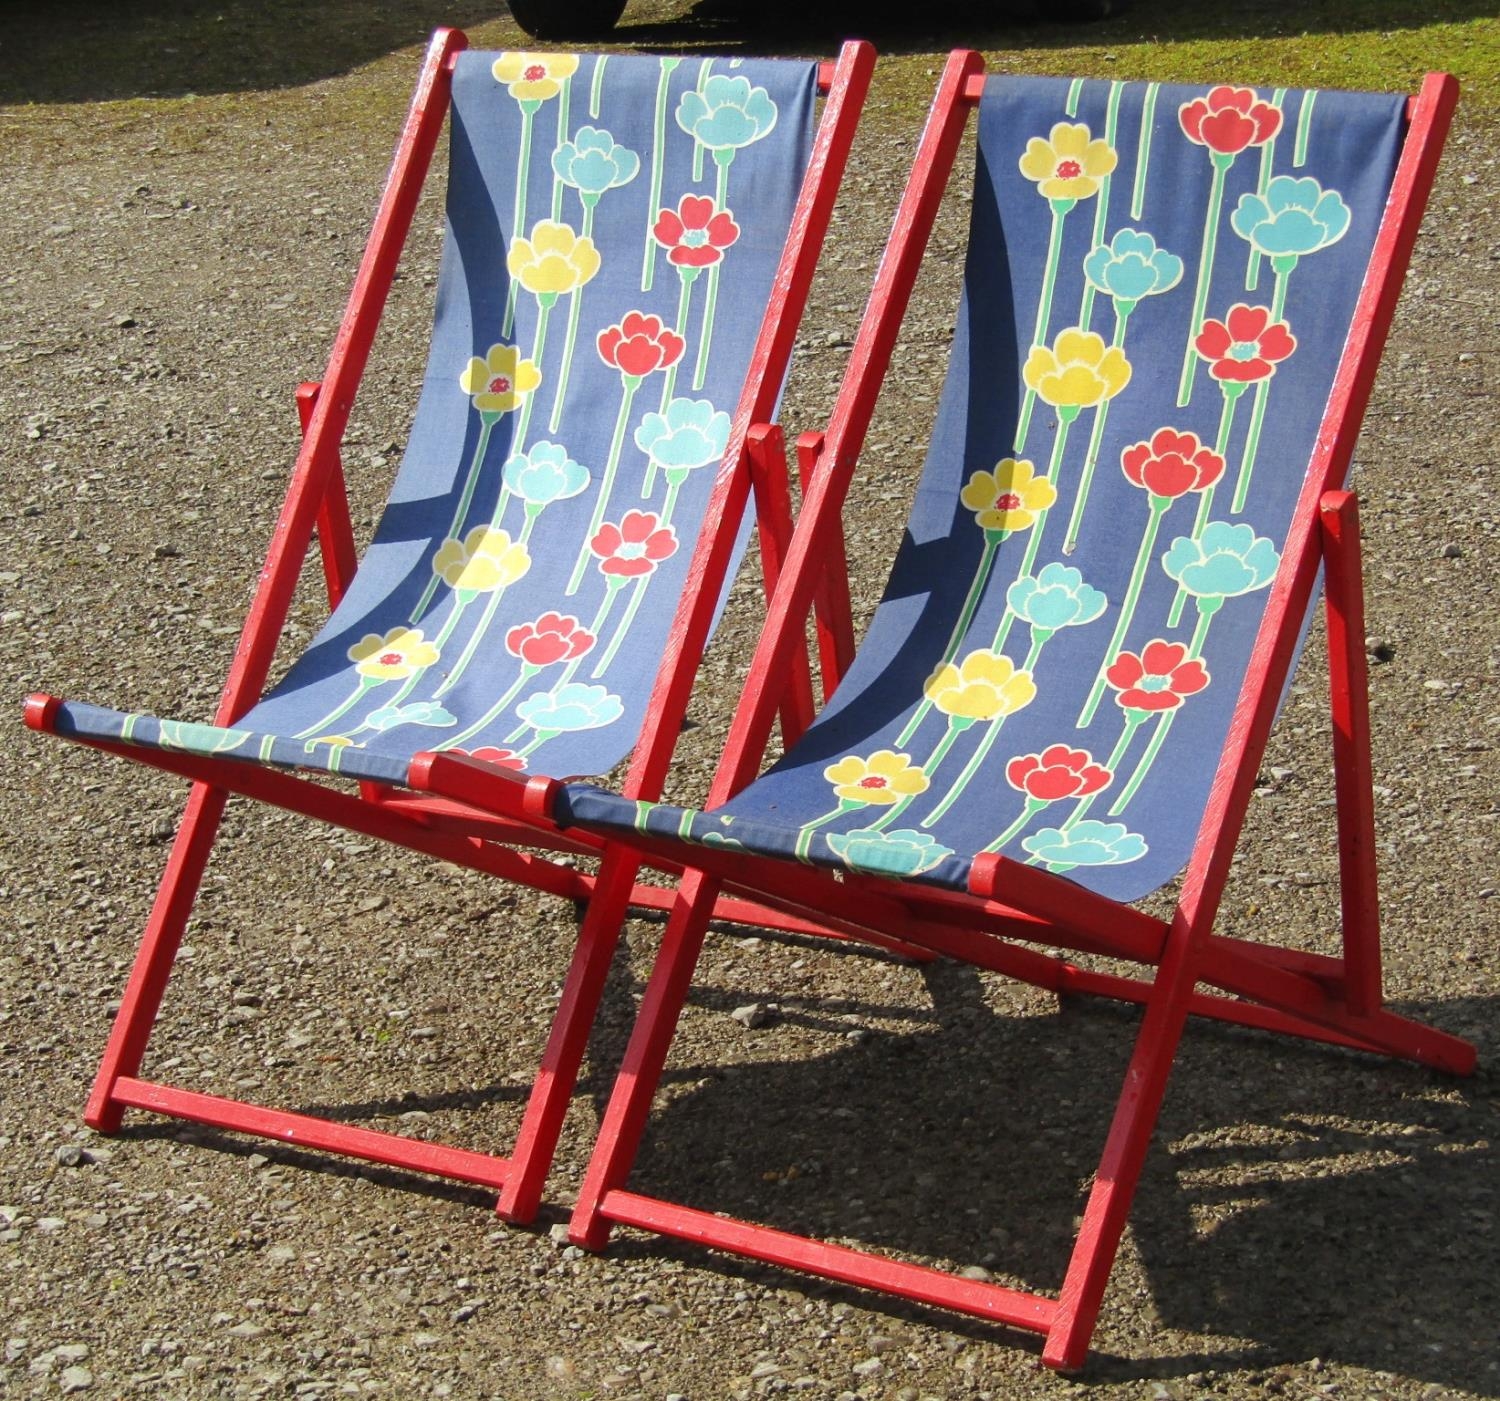 A pair of traditional folding deck chairs with painted frames, floral patterned seats, together with